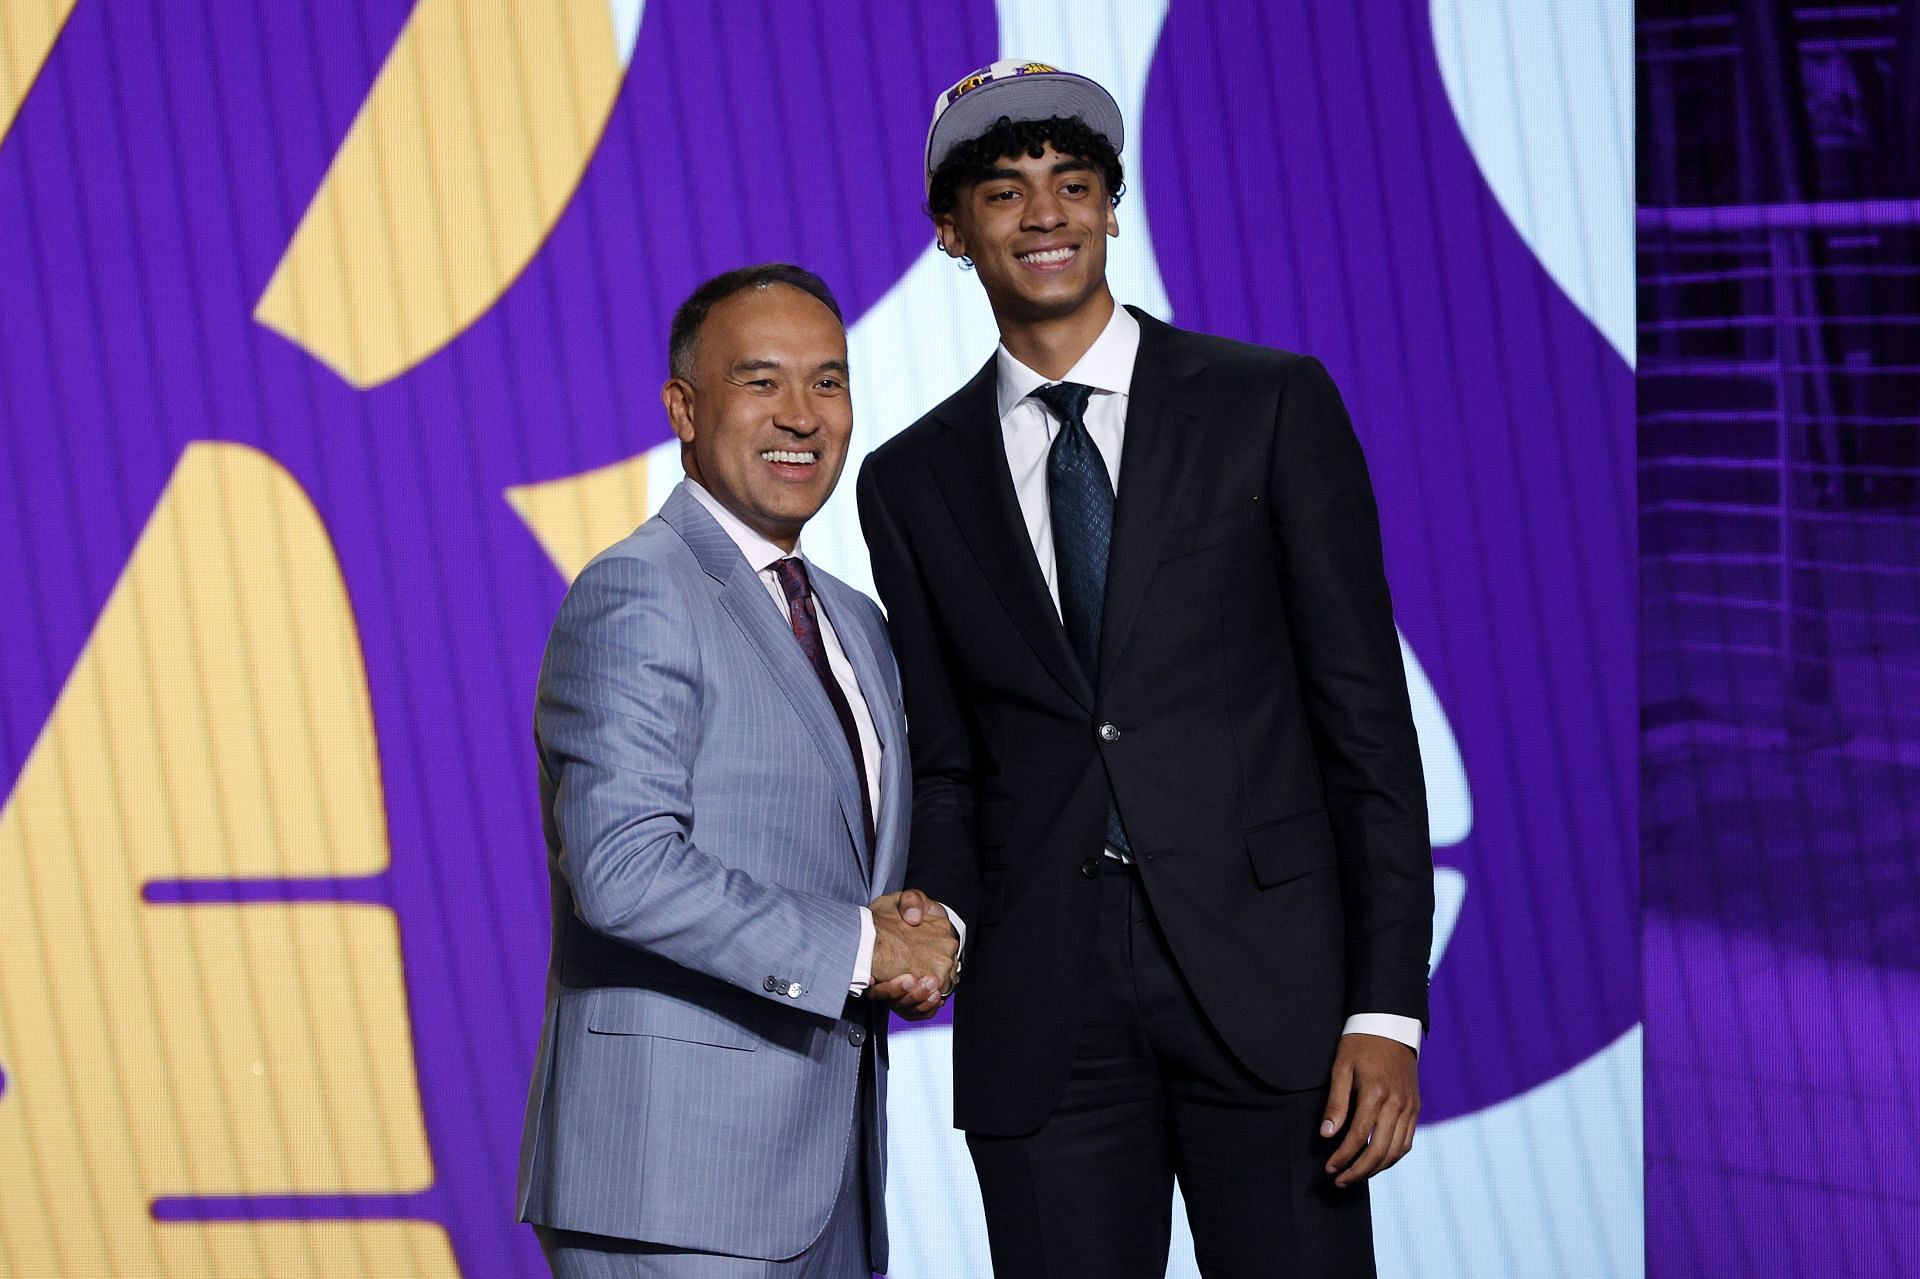 Deputy commissioner Mark Tatum and Max Christie pose for photos after Christie was drafted 35th overall by the LA Lakers during the 2022 NBA Draft at Barclays Center on June 23, 2022 in New York City.